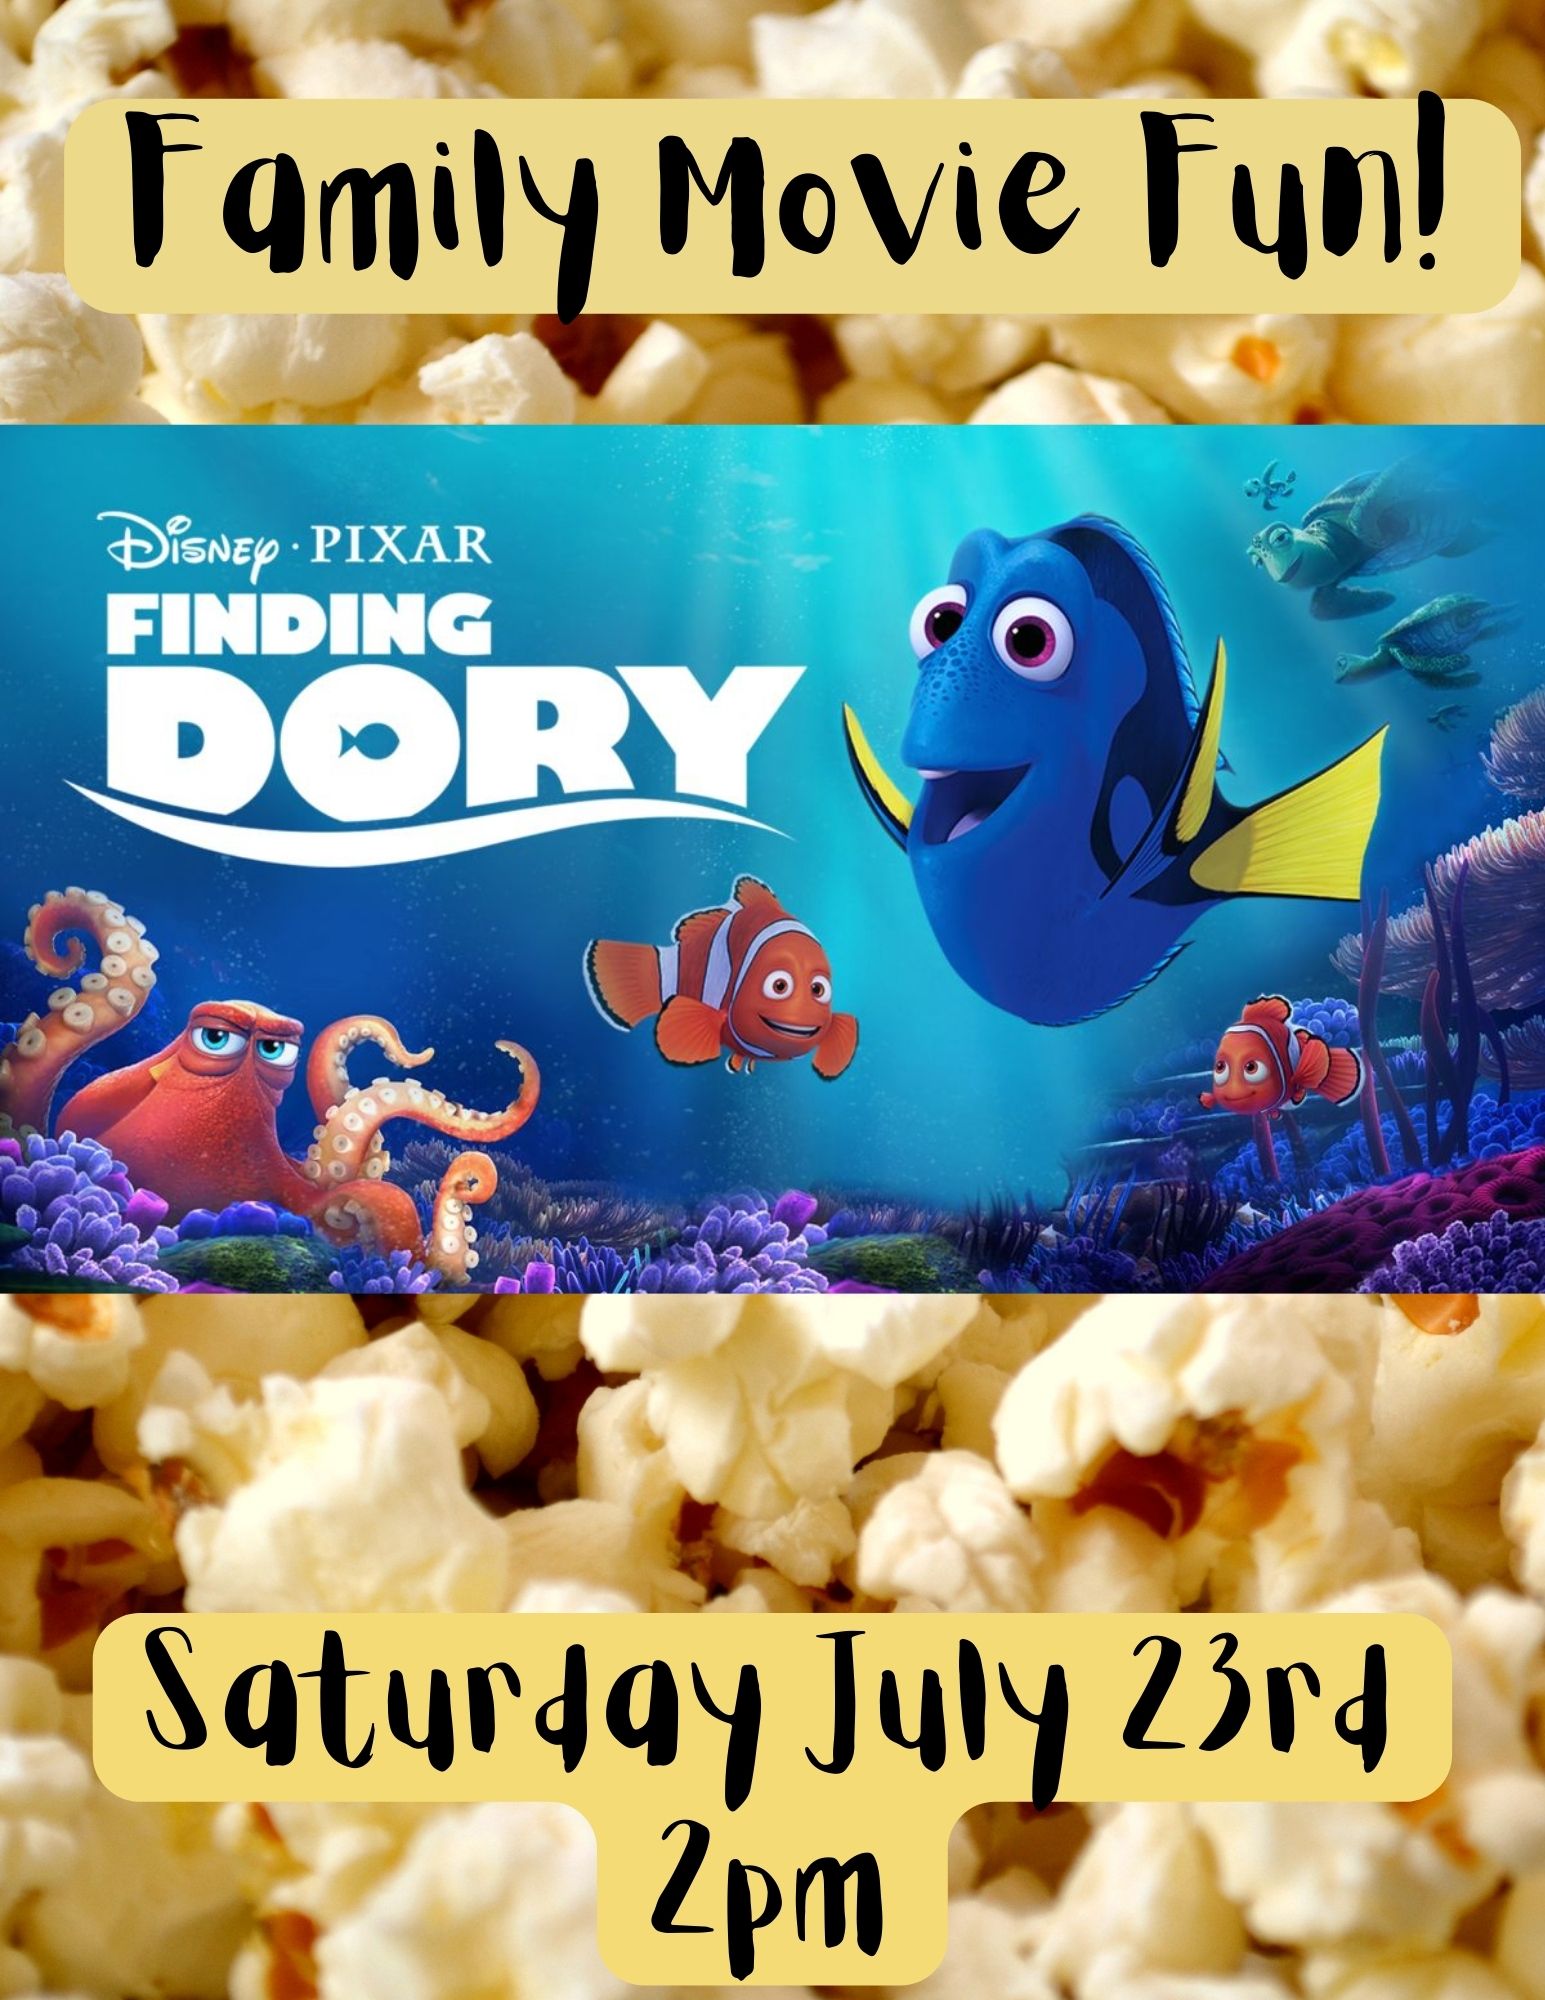 Popcorn background and a stock photo of Finding Dory with fish.